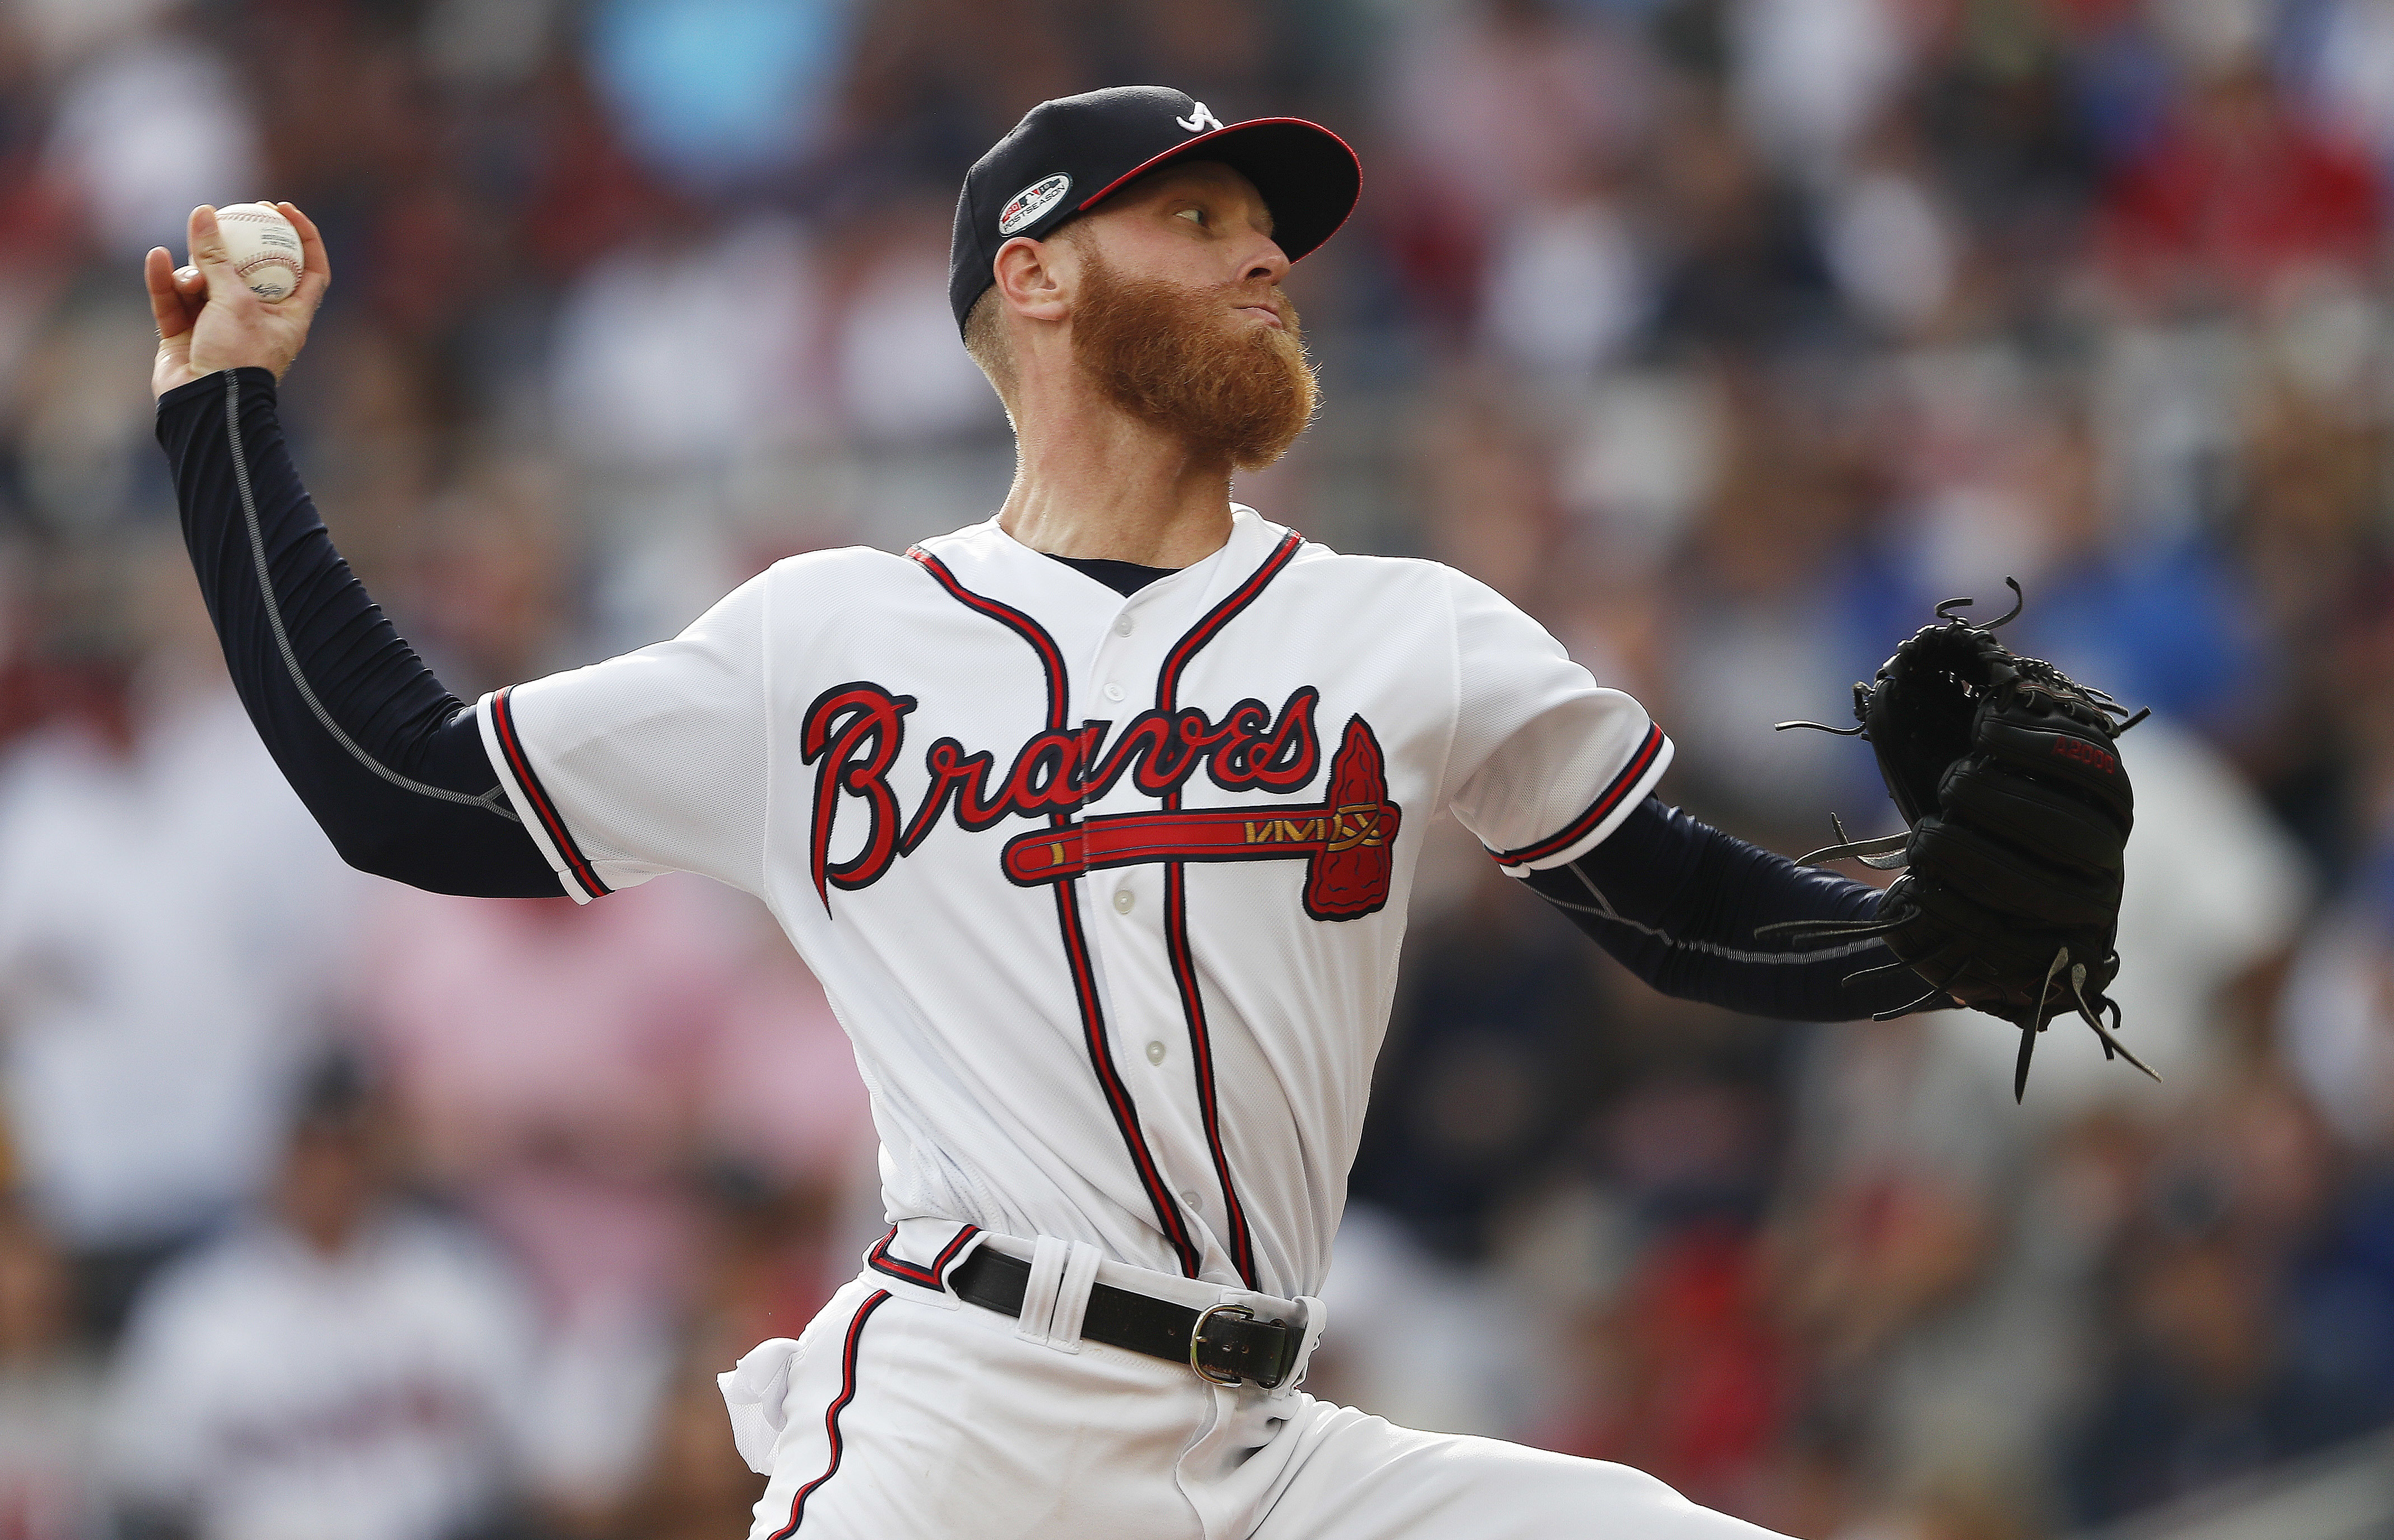 Braves: Foltynewicz will not be ready for opening day